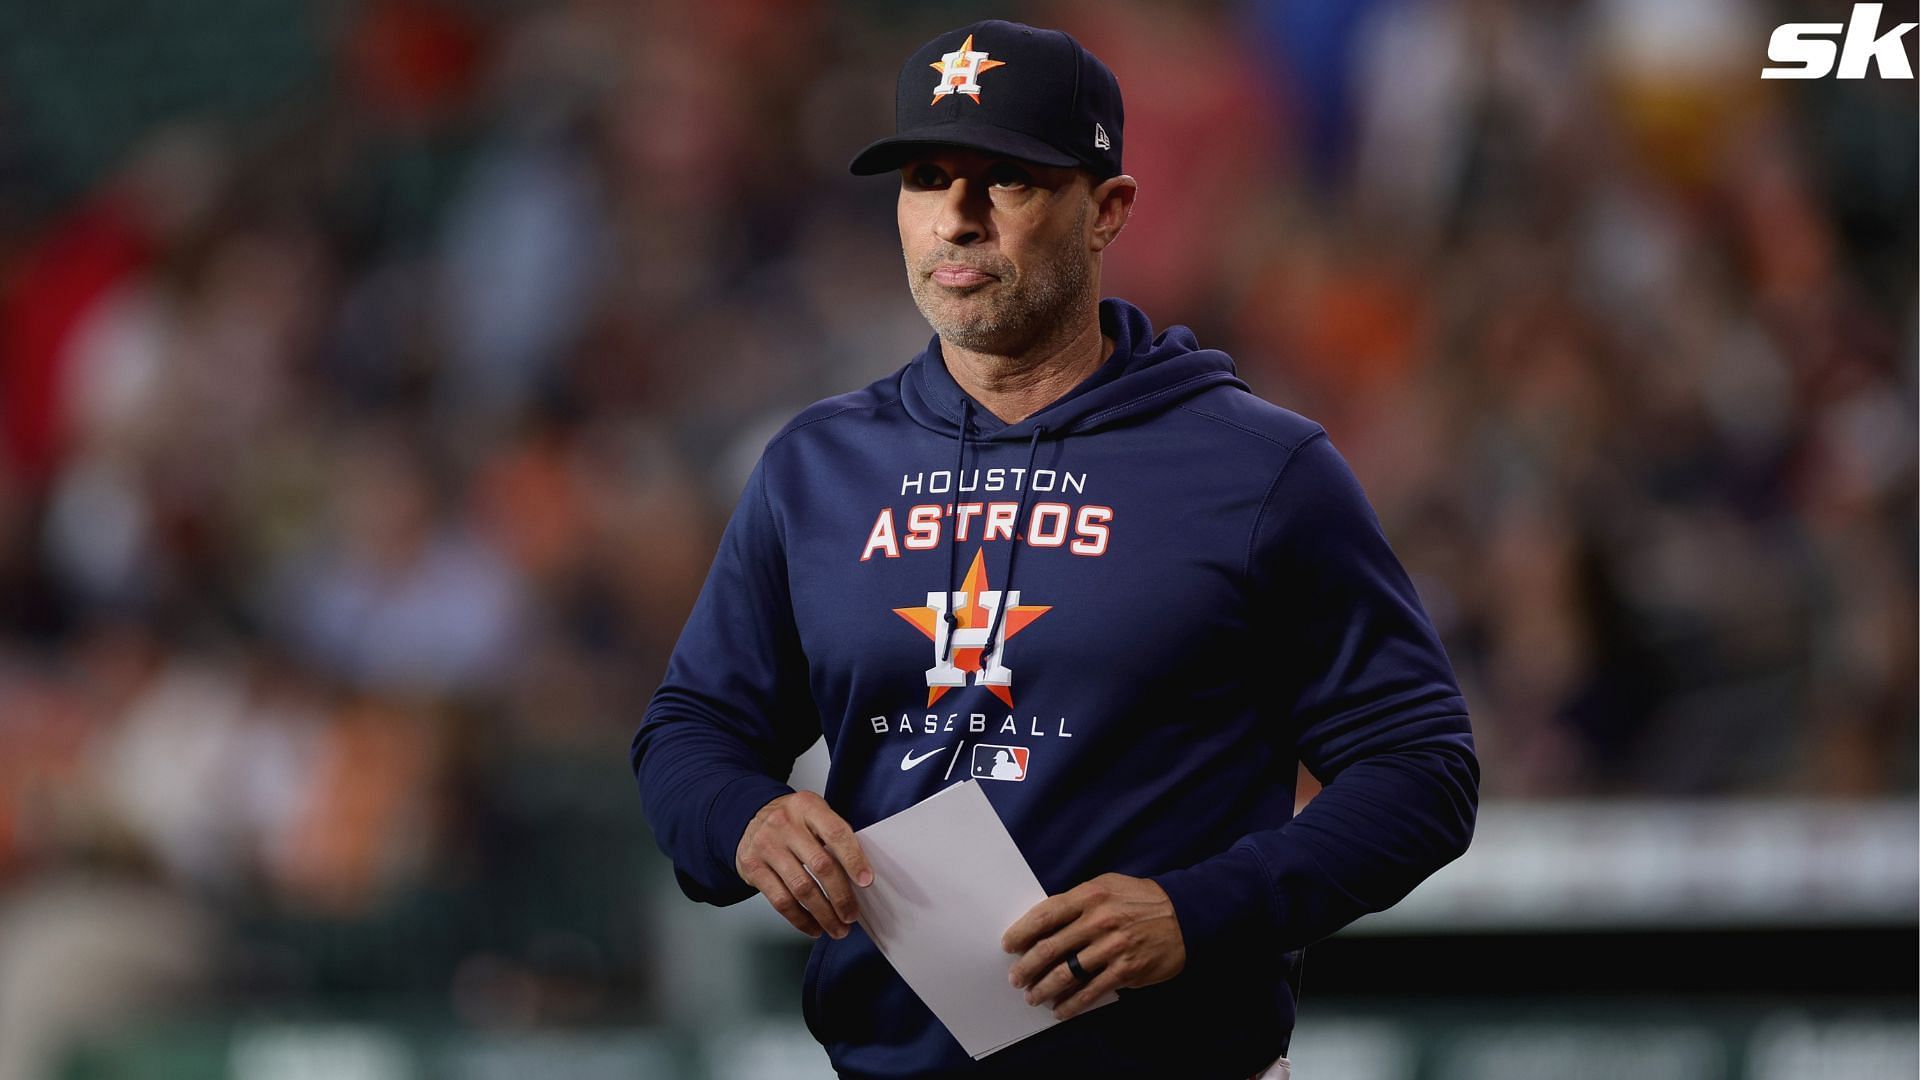 Astros manager Joe Espada praises team&rsquo;s fighting spirit after 0-4 sweep to Yankees